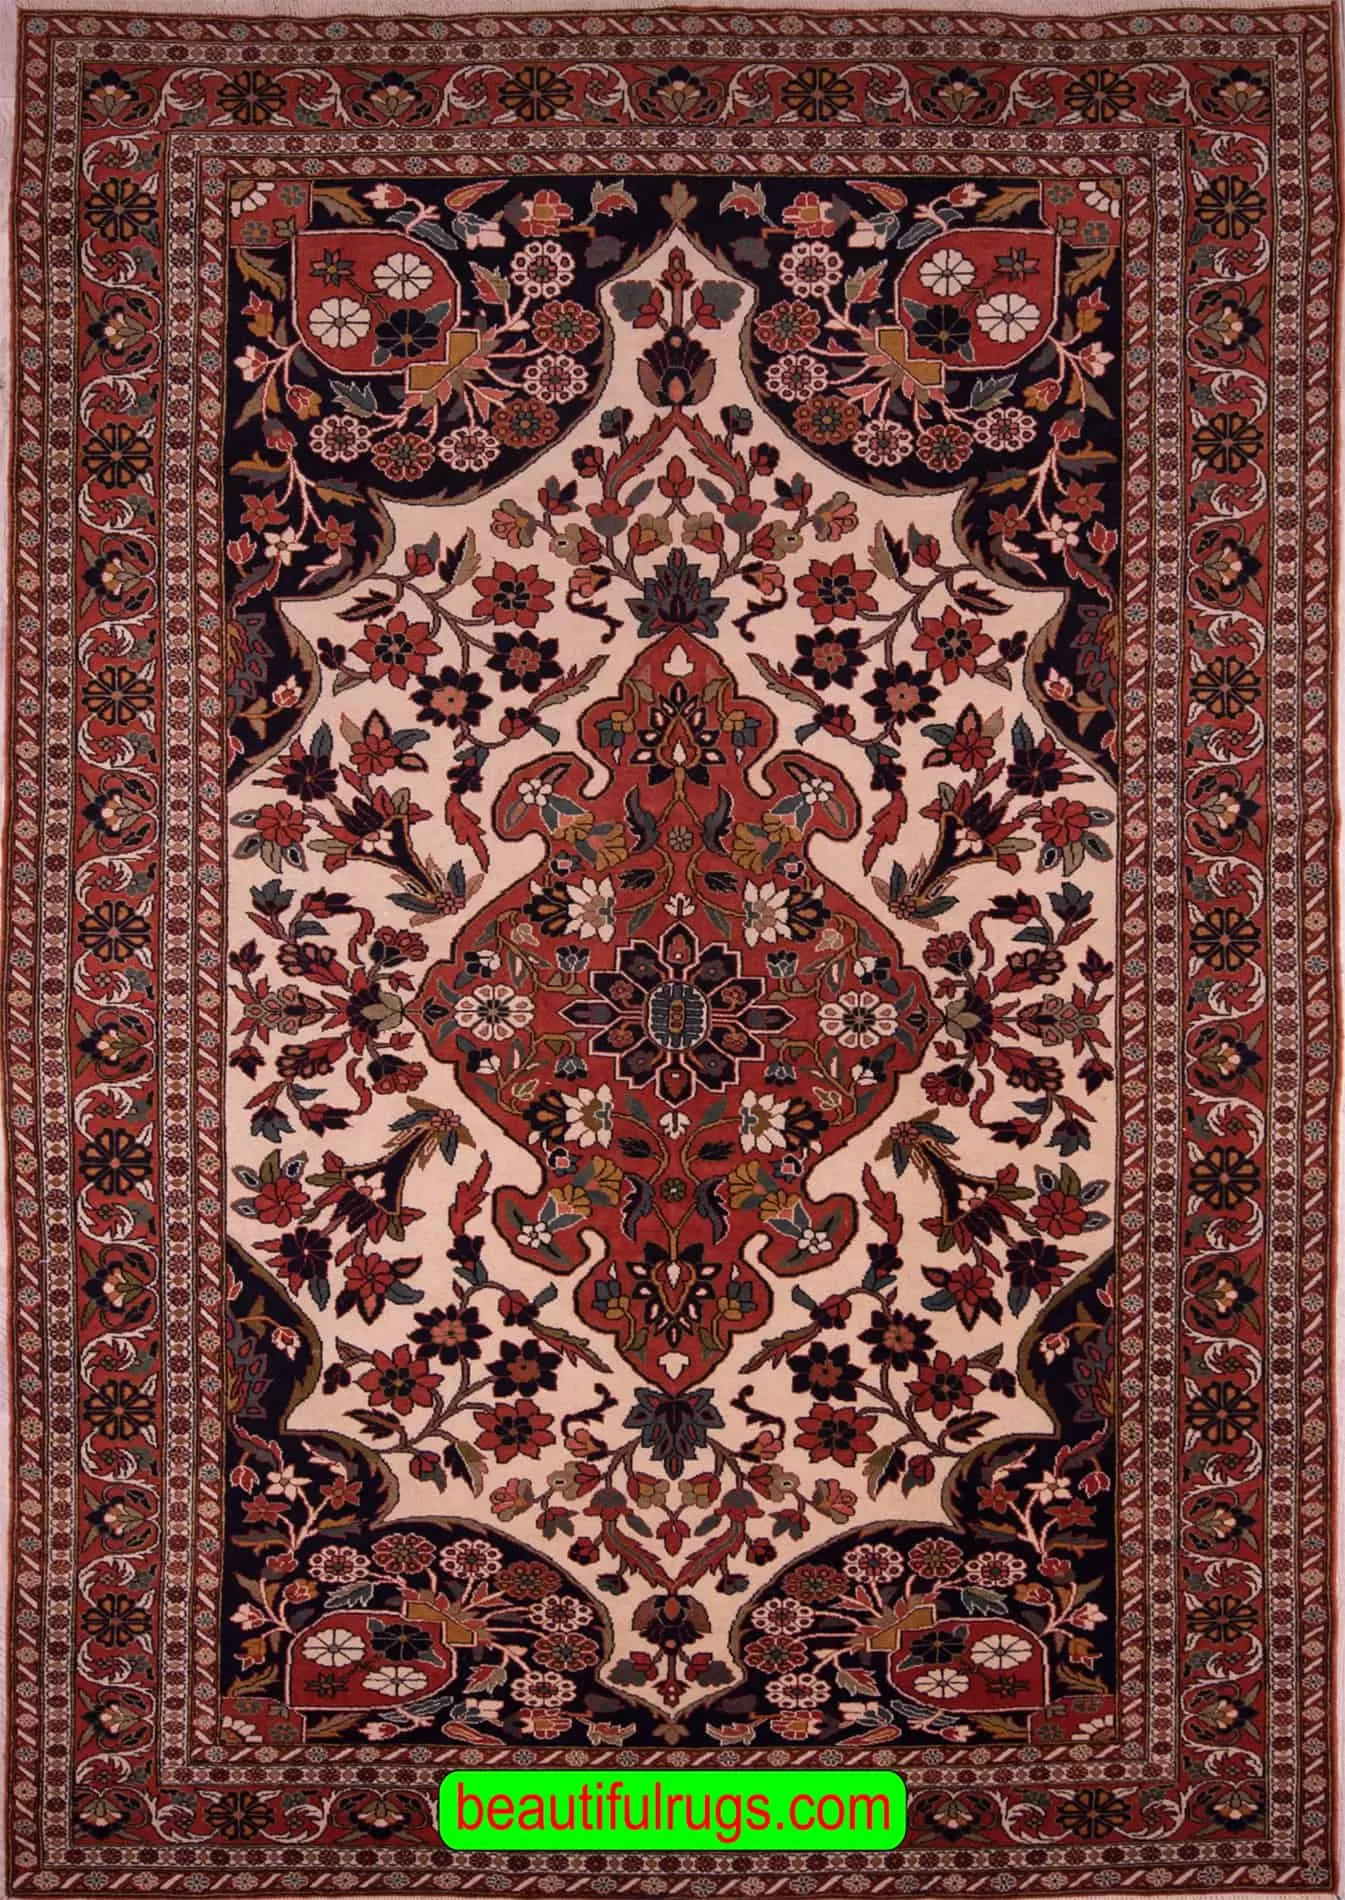 Bakshaish Rug, Handmade Persian Wool Rug with rustic red and beige color. Size 6.5x9.6